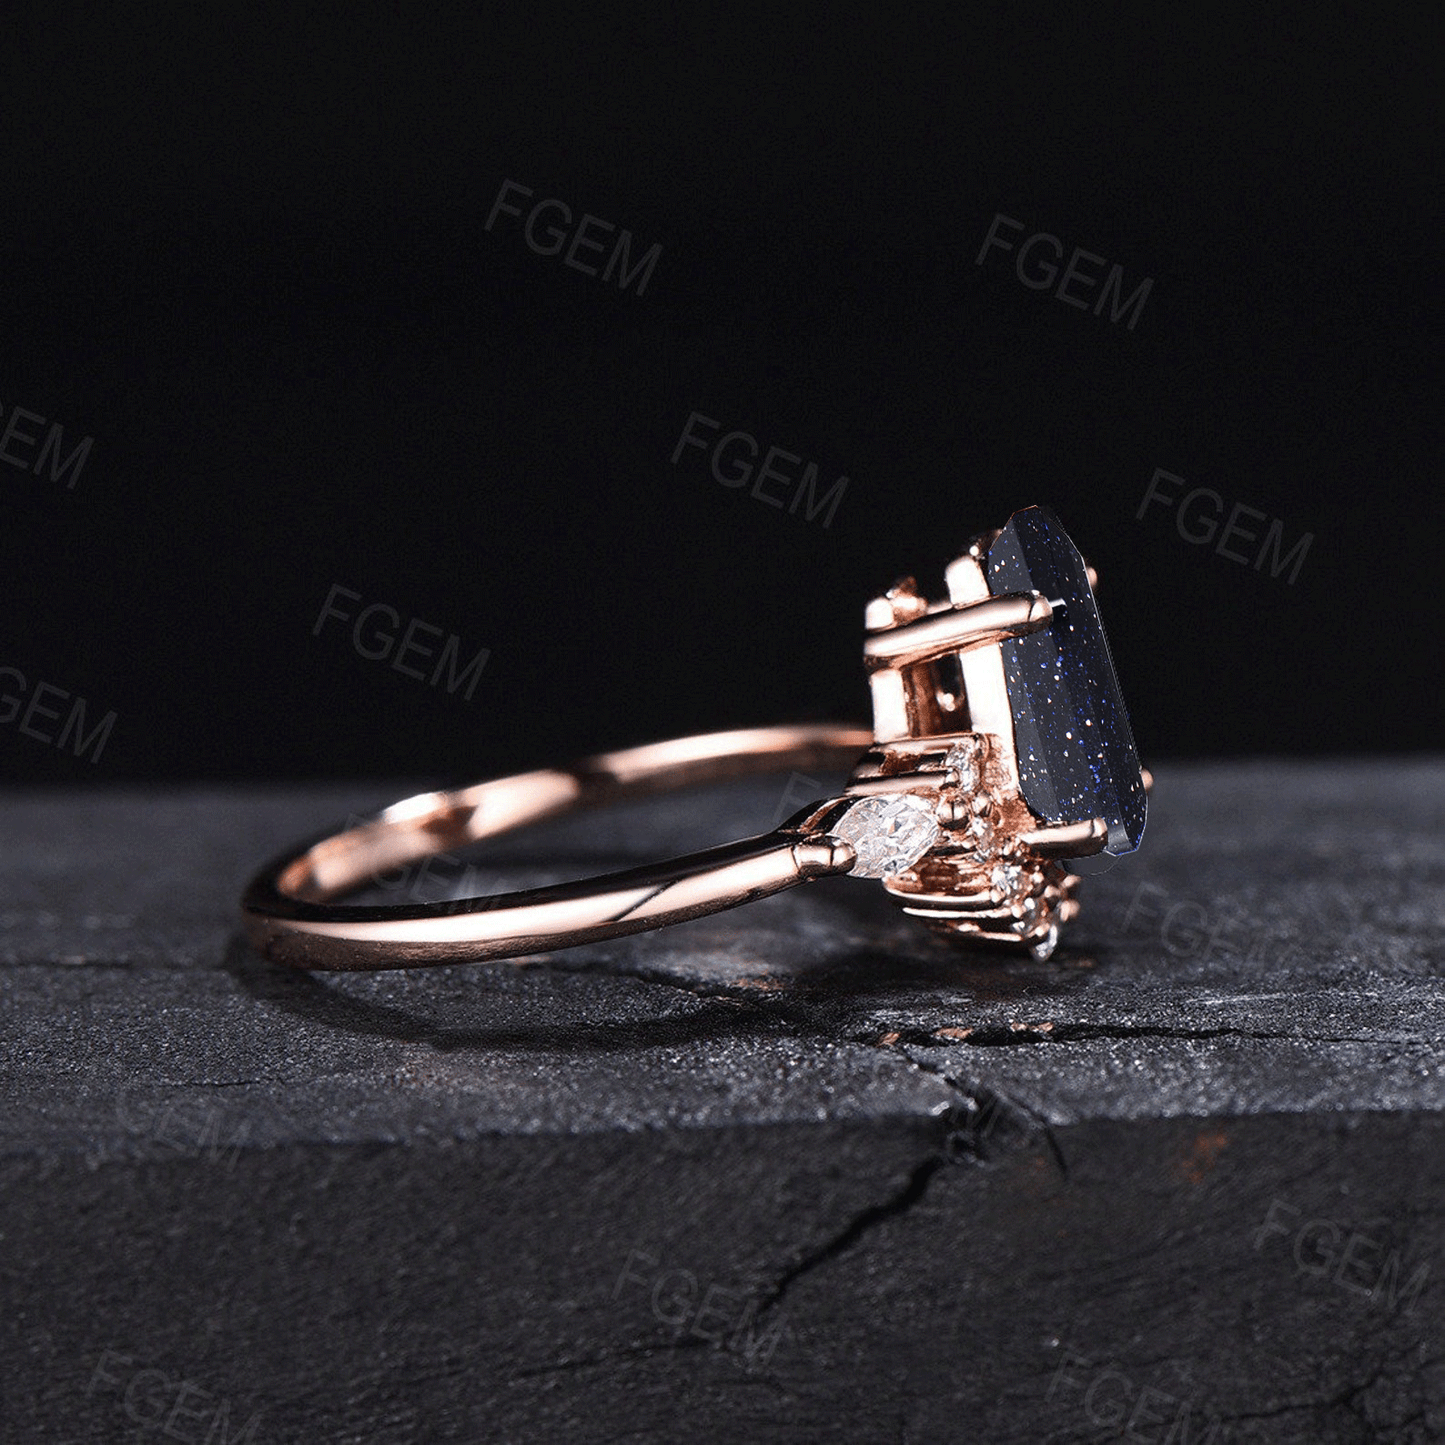 Coffin Shaped Galaxy Starry Sky Blue Sandstone Wedding Ring Vintage Vampire Gothic Engagement Ring Moissanite Ring Unique Promise Statement Ring